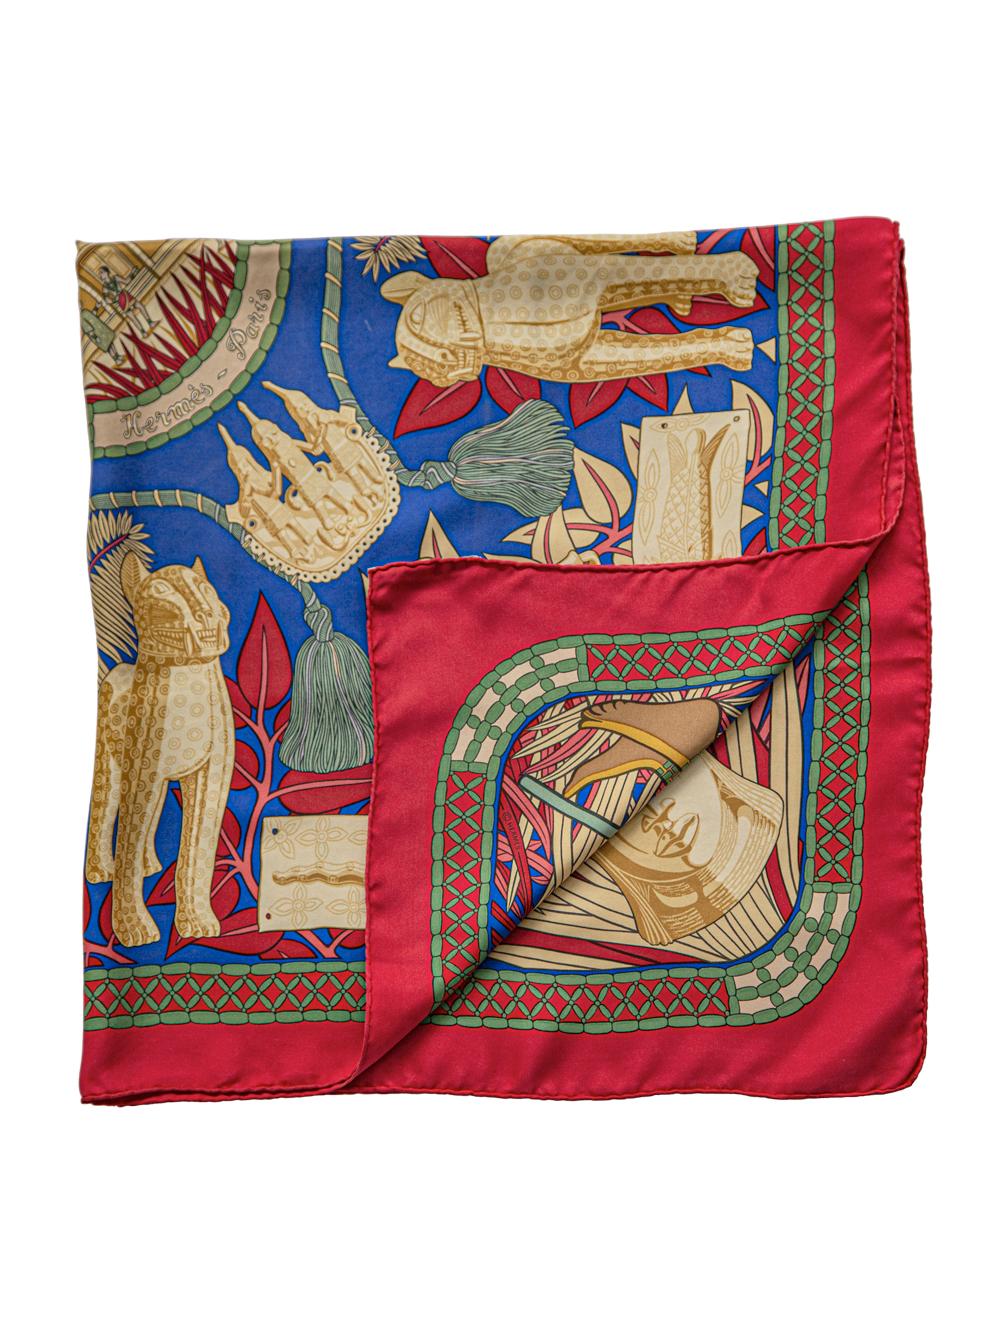 Crafted in France from the finest red silk, this pre-owned scarf by Hermès features lightweight construction, a square shape and print motifs. Designed by Sophie Koechlin for Hermes in 1997, this print celebrates the treasures of the Dohomey Kingdom